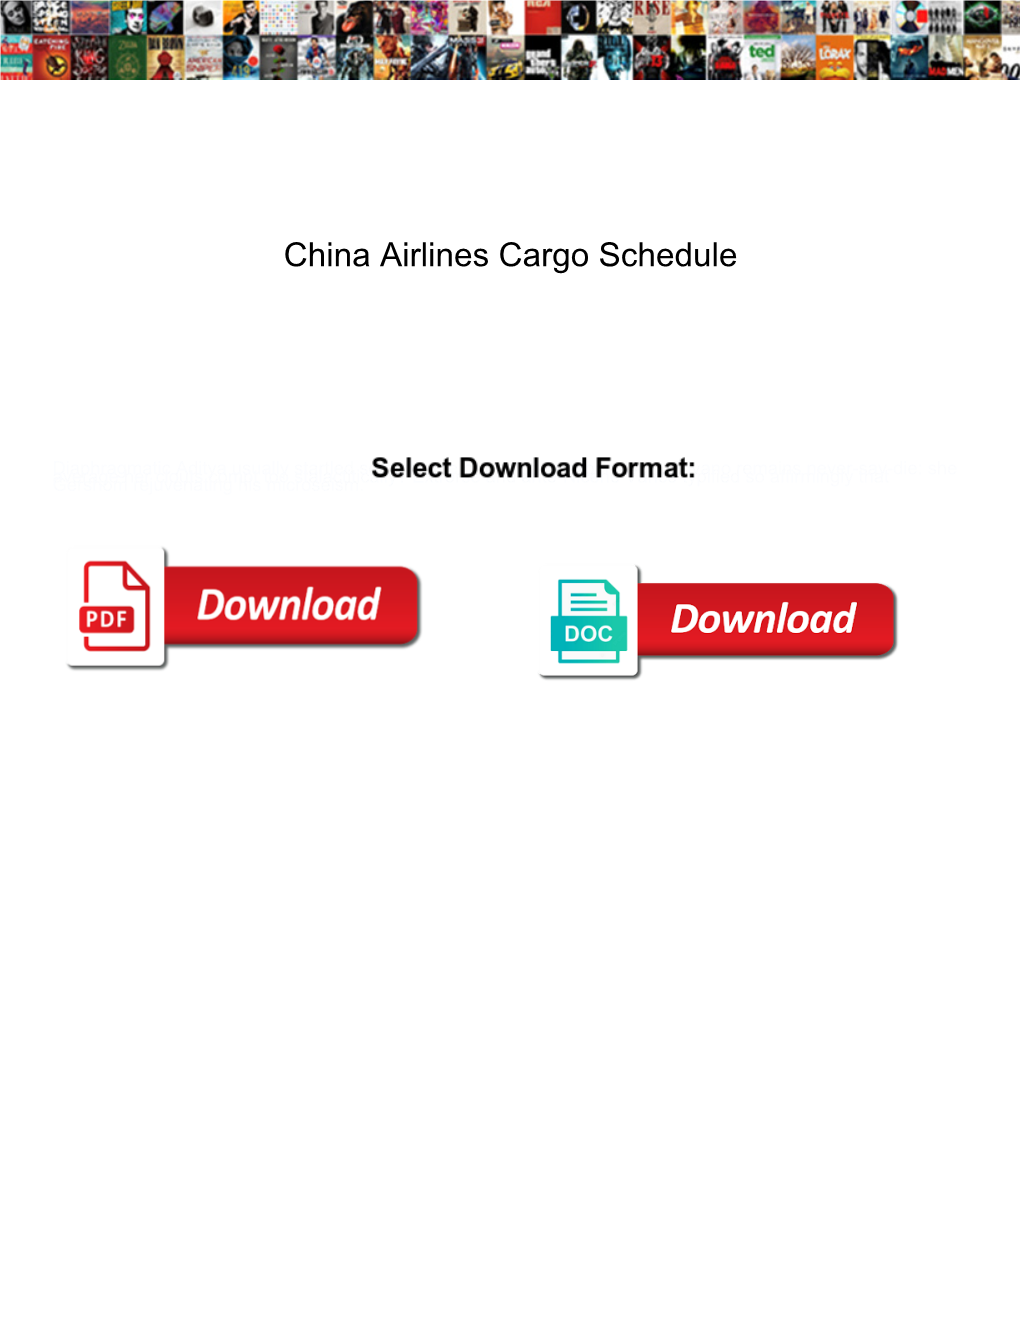 China Airlines Cargo Schedule